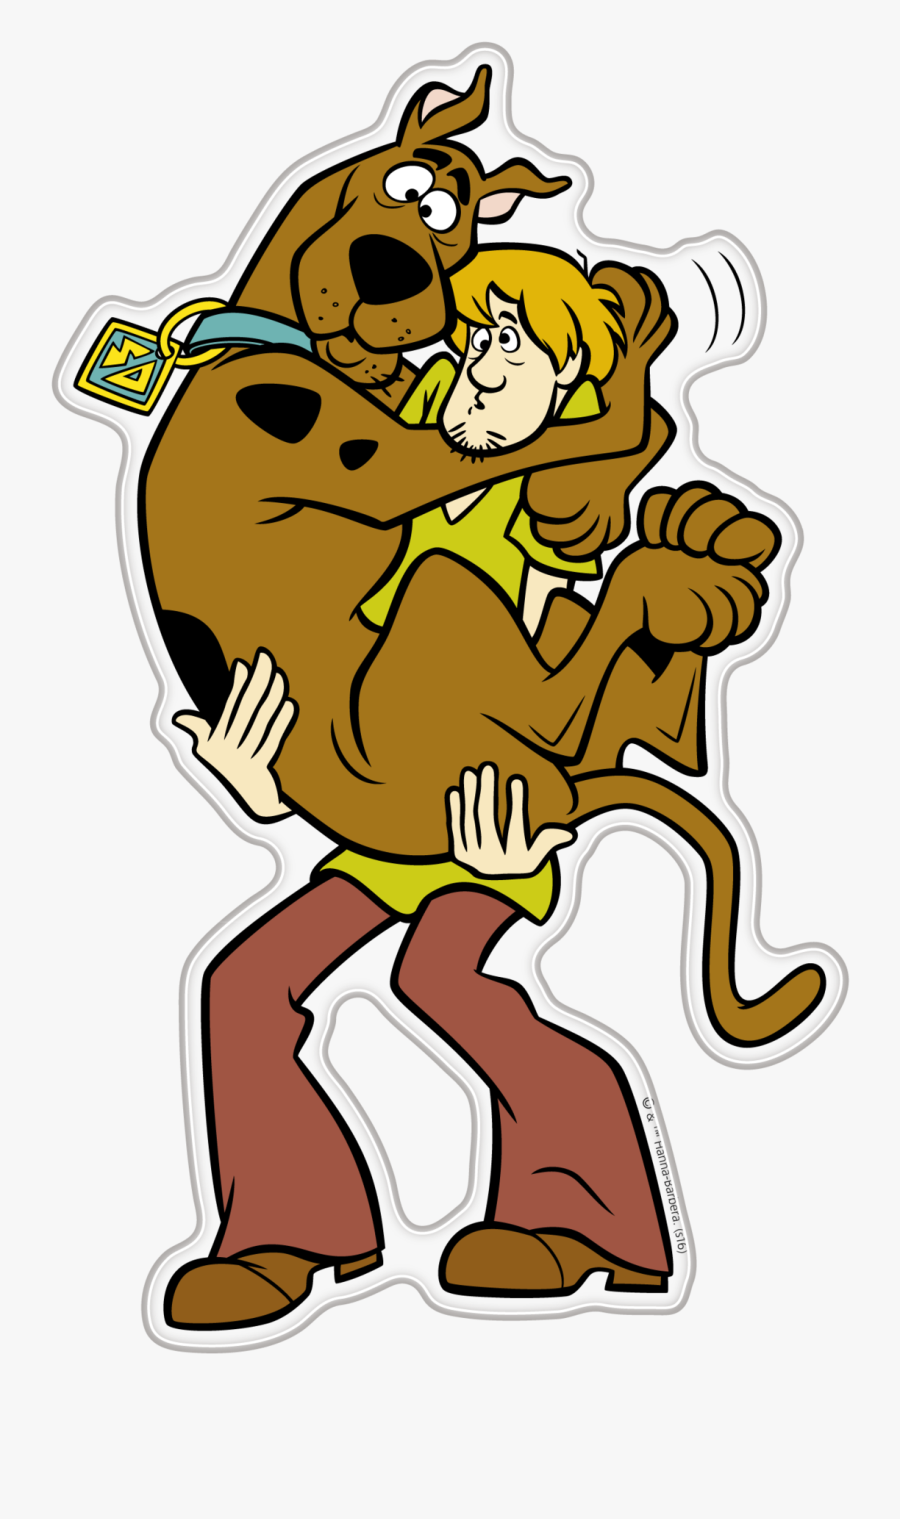 Scared Scooby-doo Shaggy Premium 3d Character Fan Emblem - Scooby Doo And Shaggy Png, Transparent Clipart